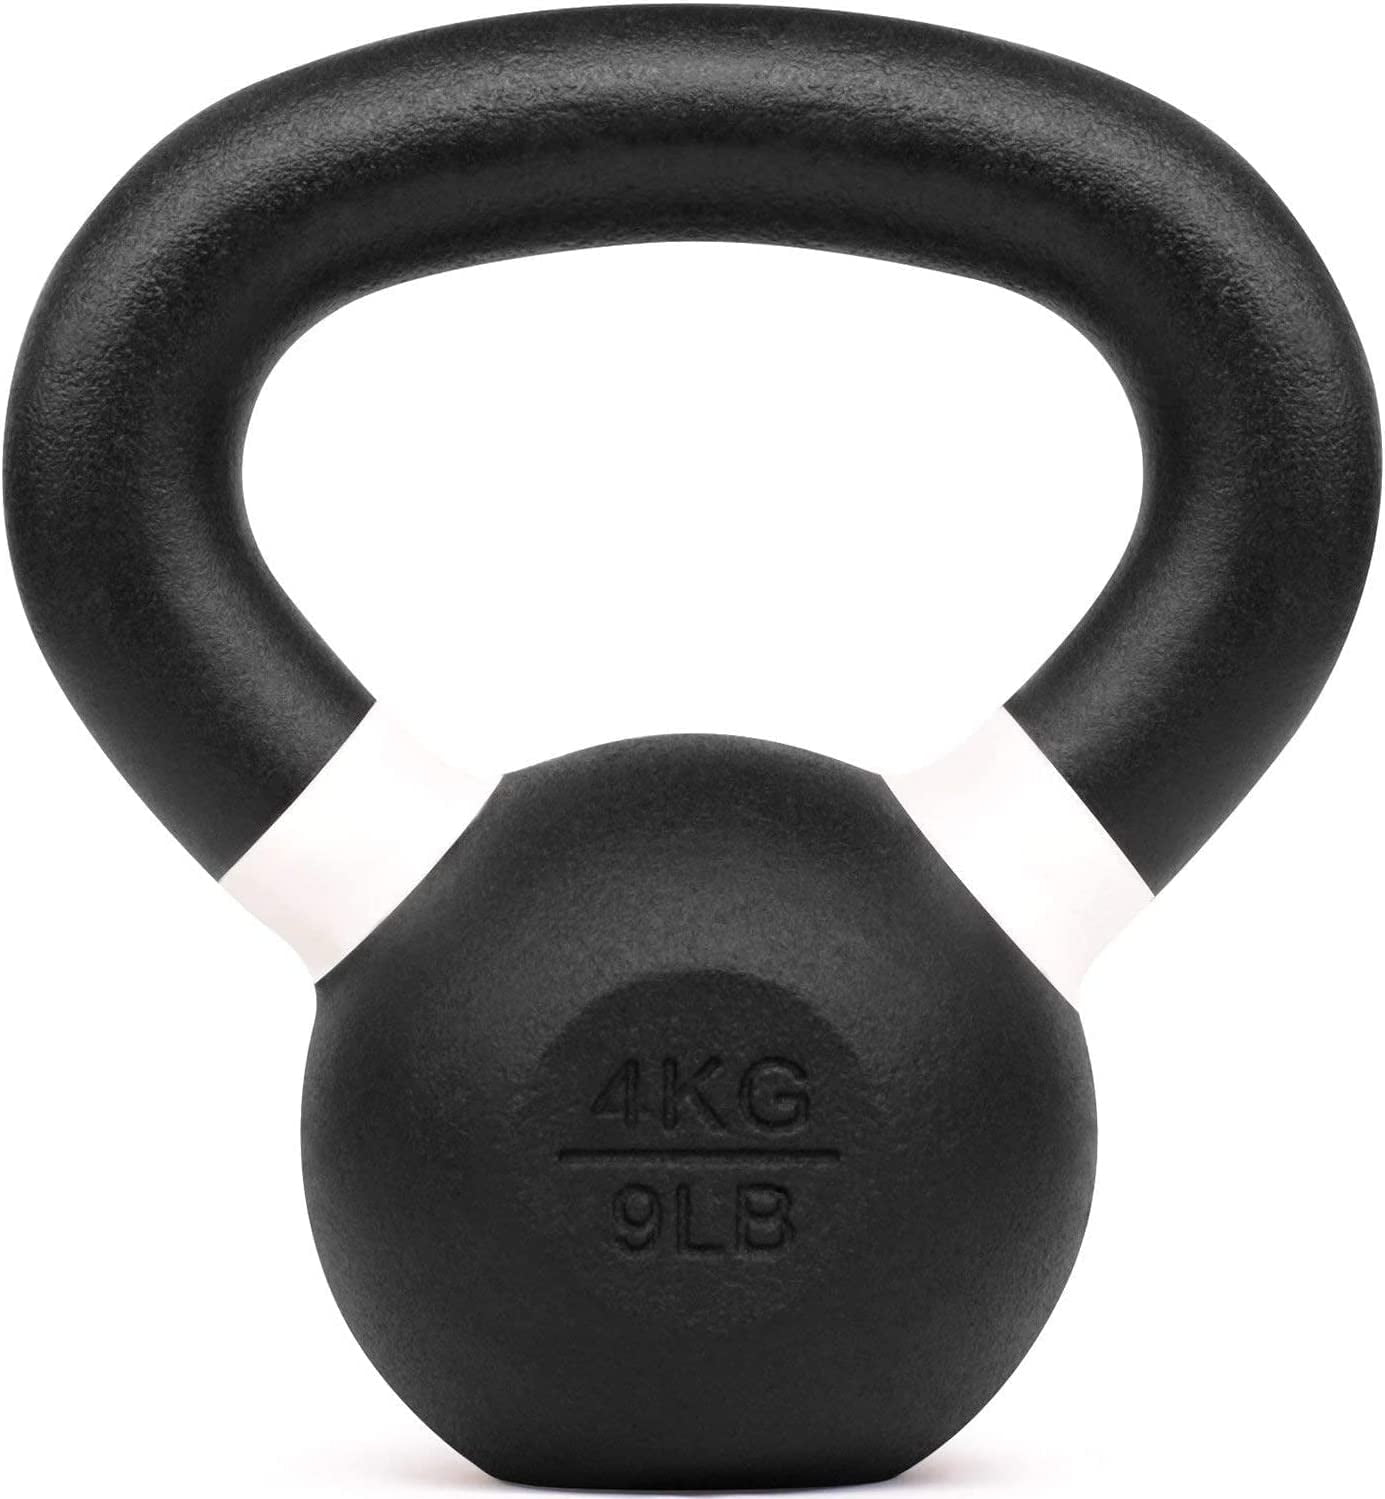 Yes4All 24kg / 53lb Powder Coated Kettlebell, Single 